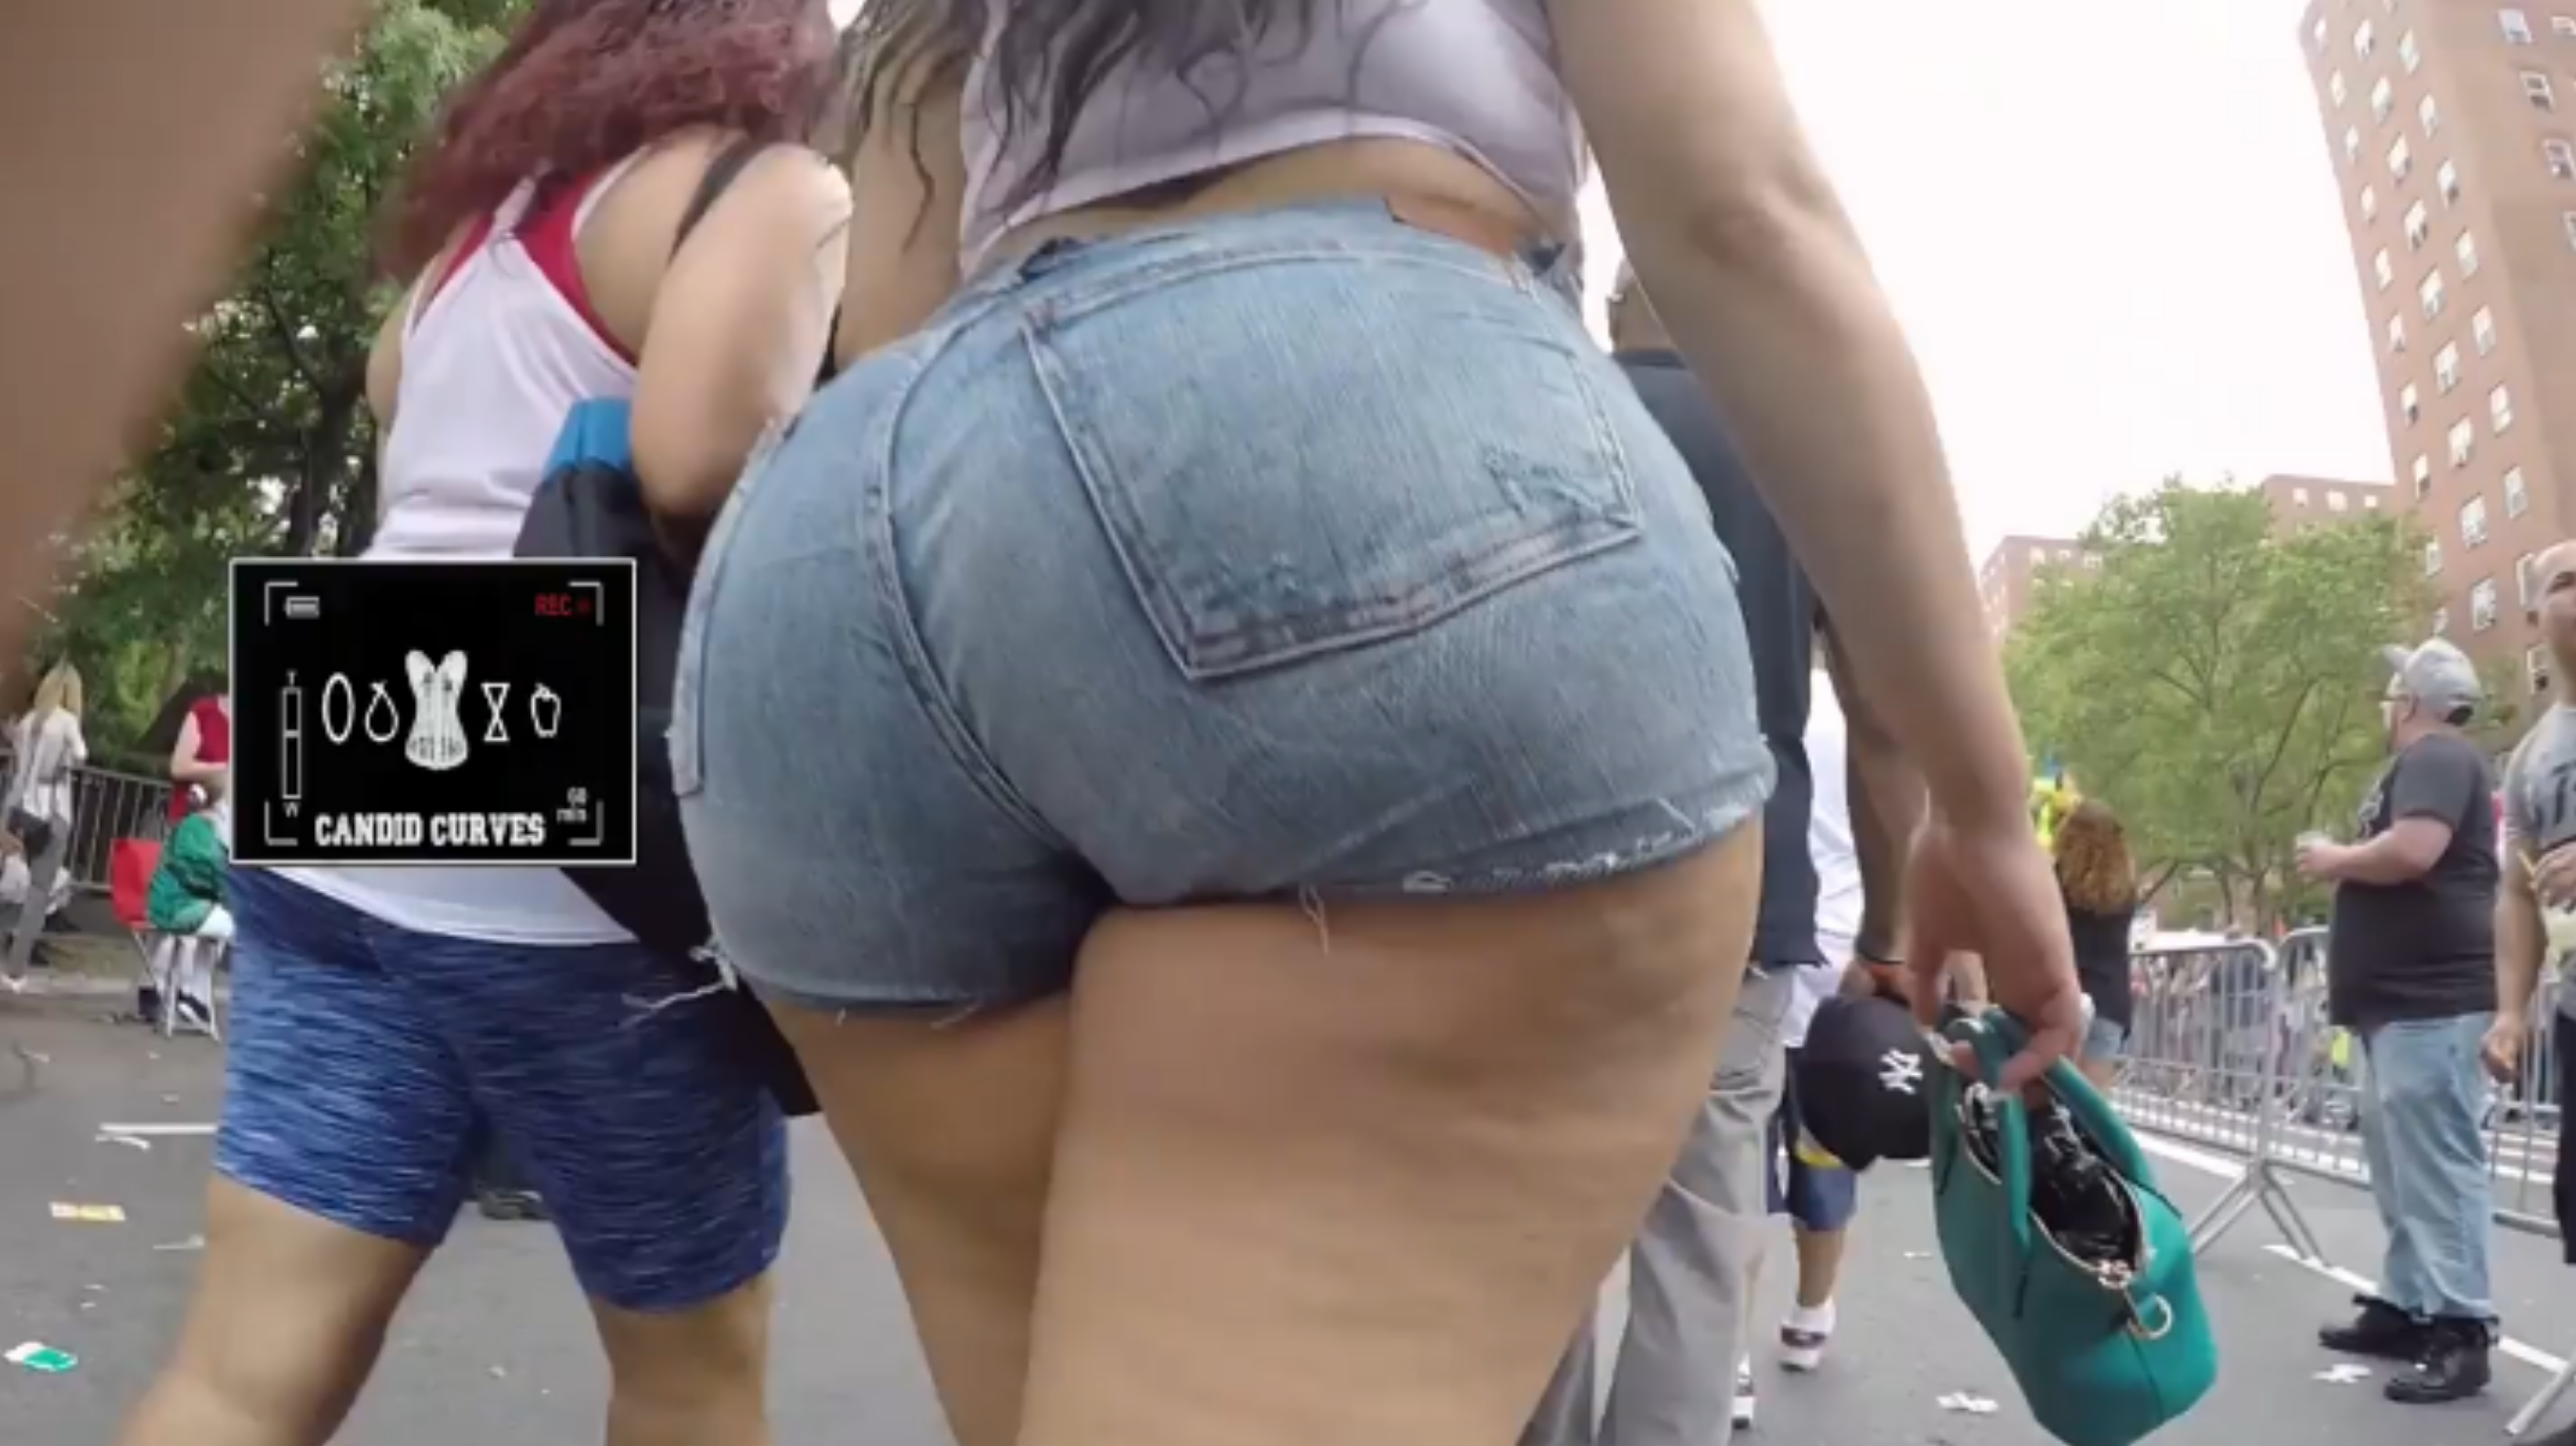 TIGHT BOOTY SHORTS GIANT ASS CANDID BABE